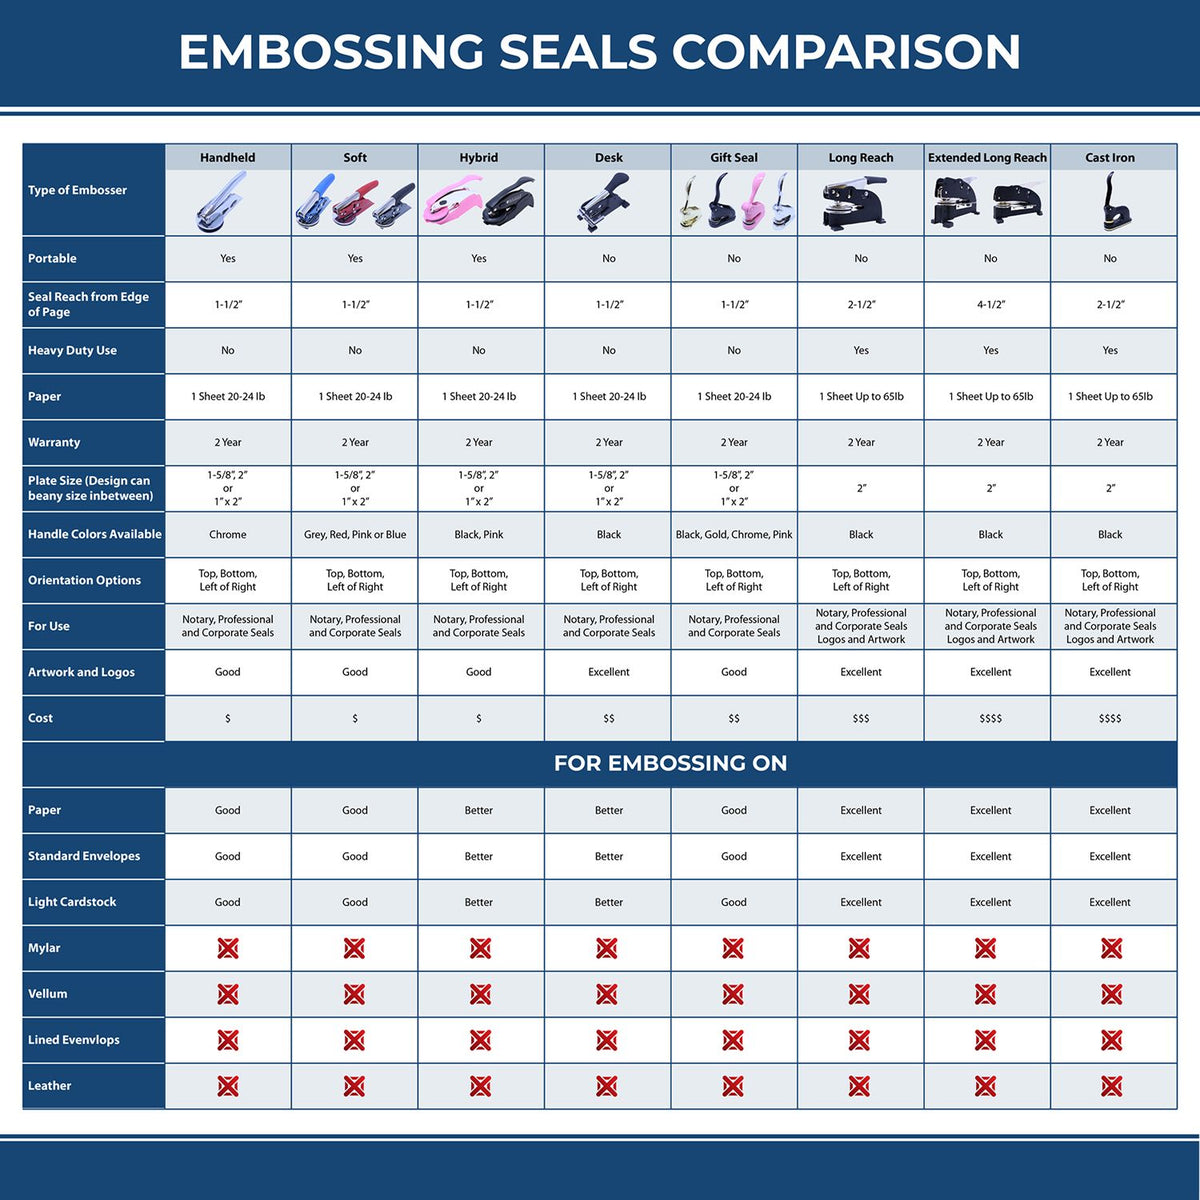 A comparison chart for the different types of mount models available for the Soft Massachusetts Professional Geologist Seal